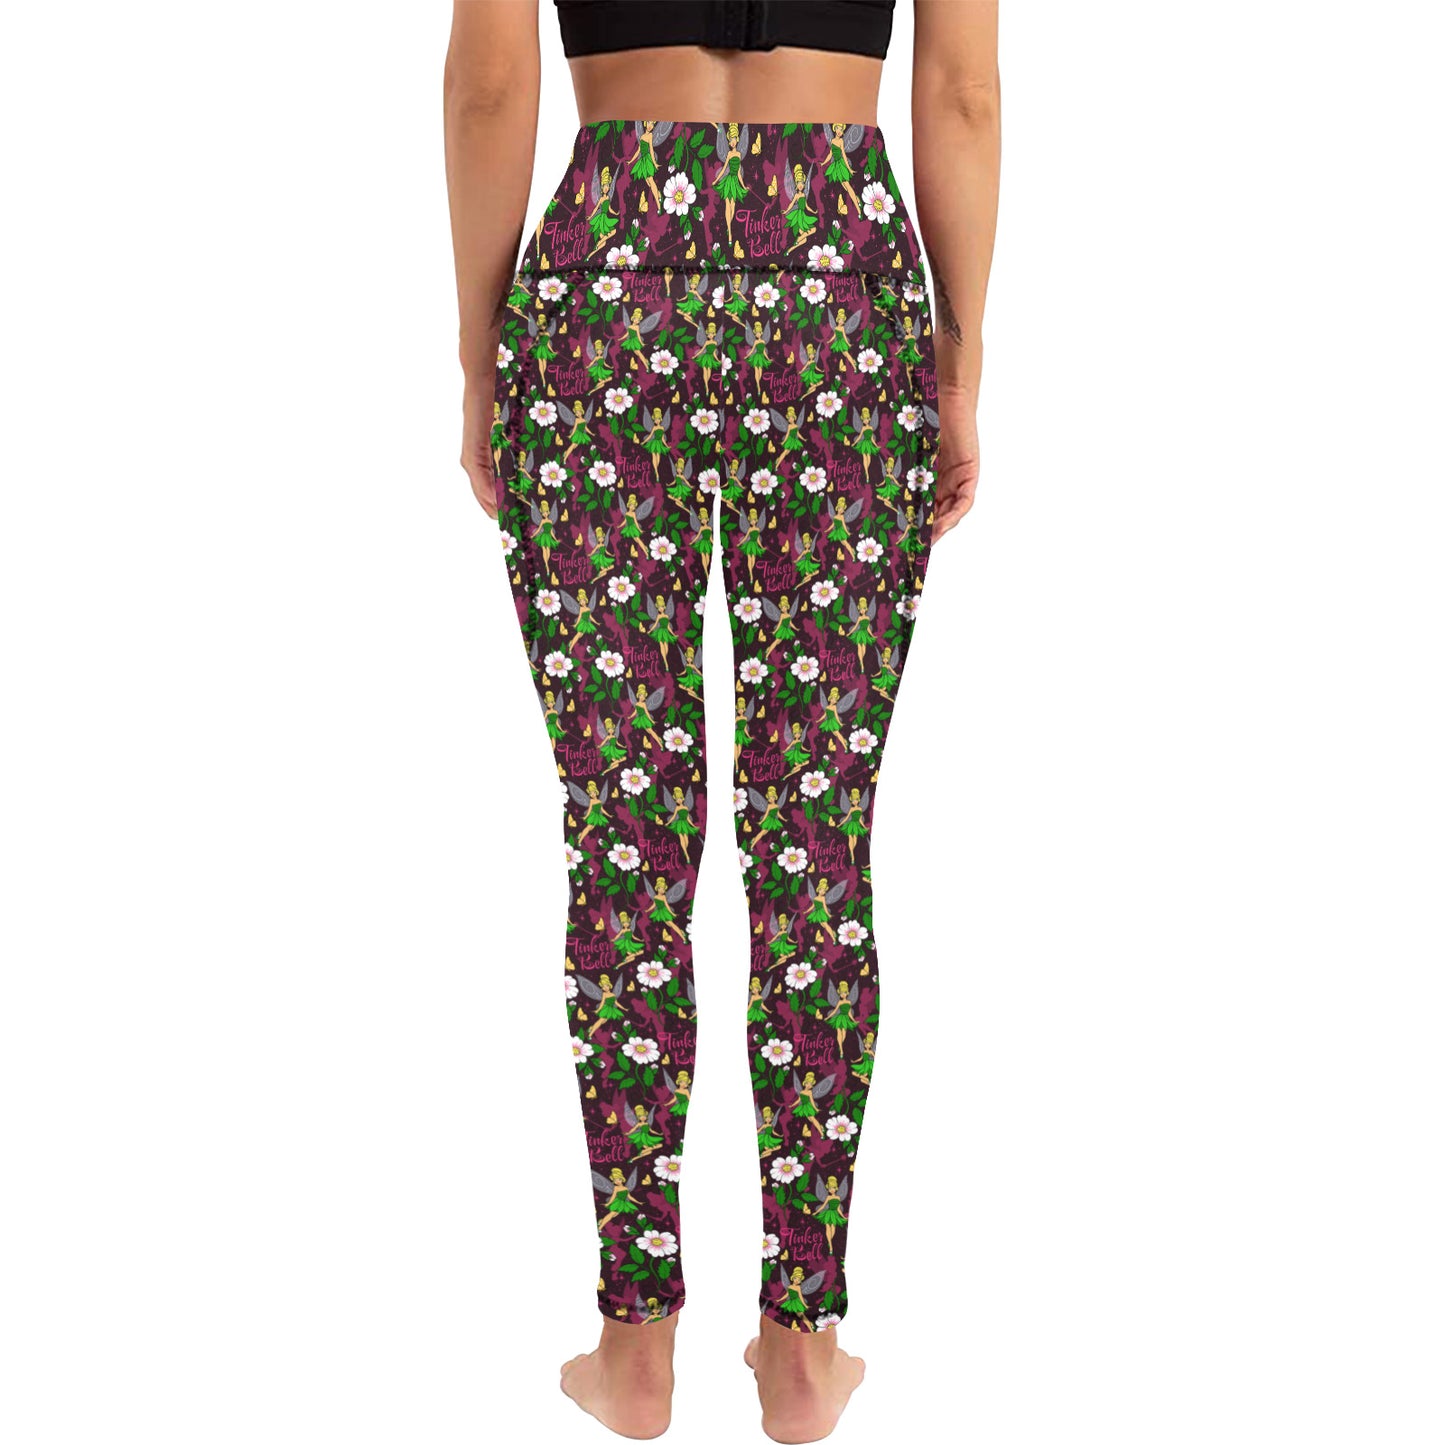 Tinkerbell Women's Athletic Leggings With Pockets